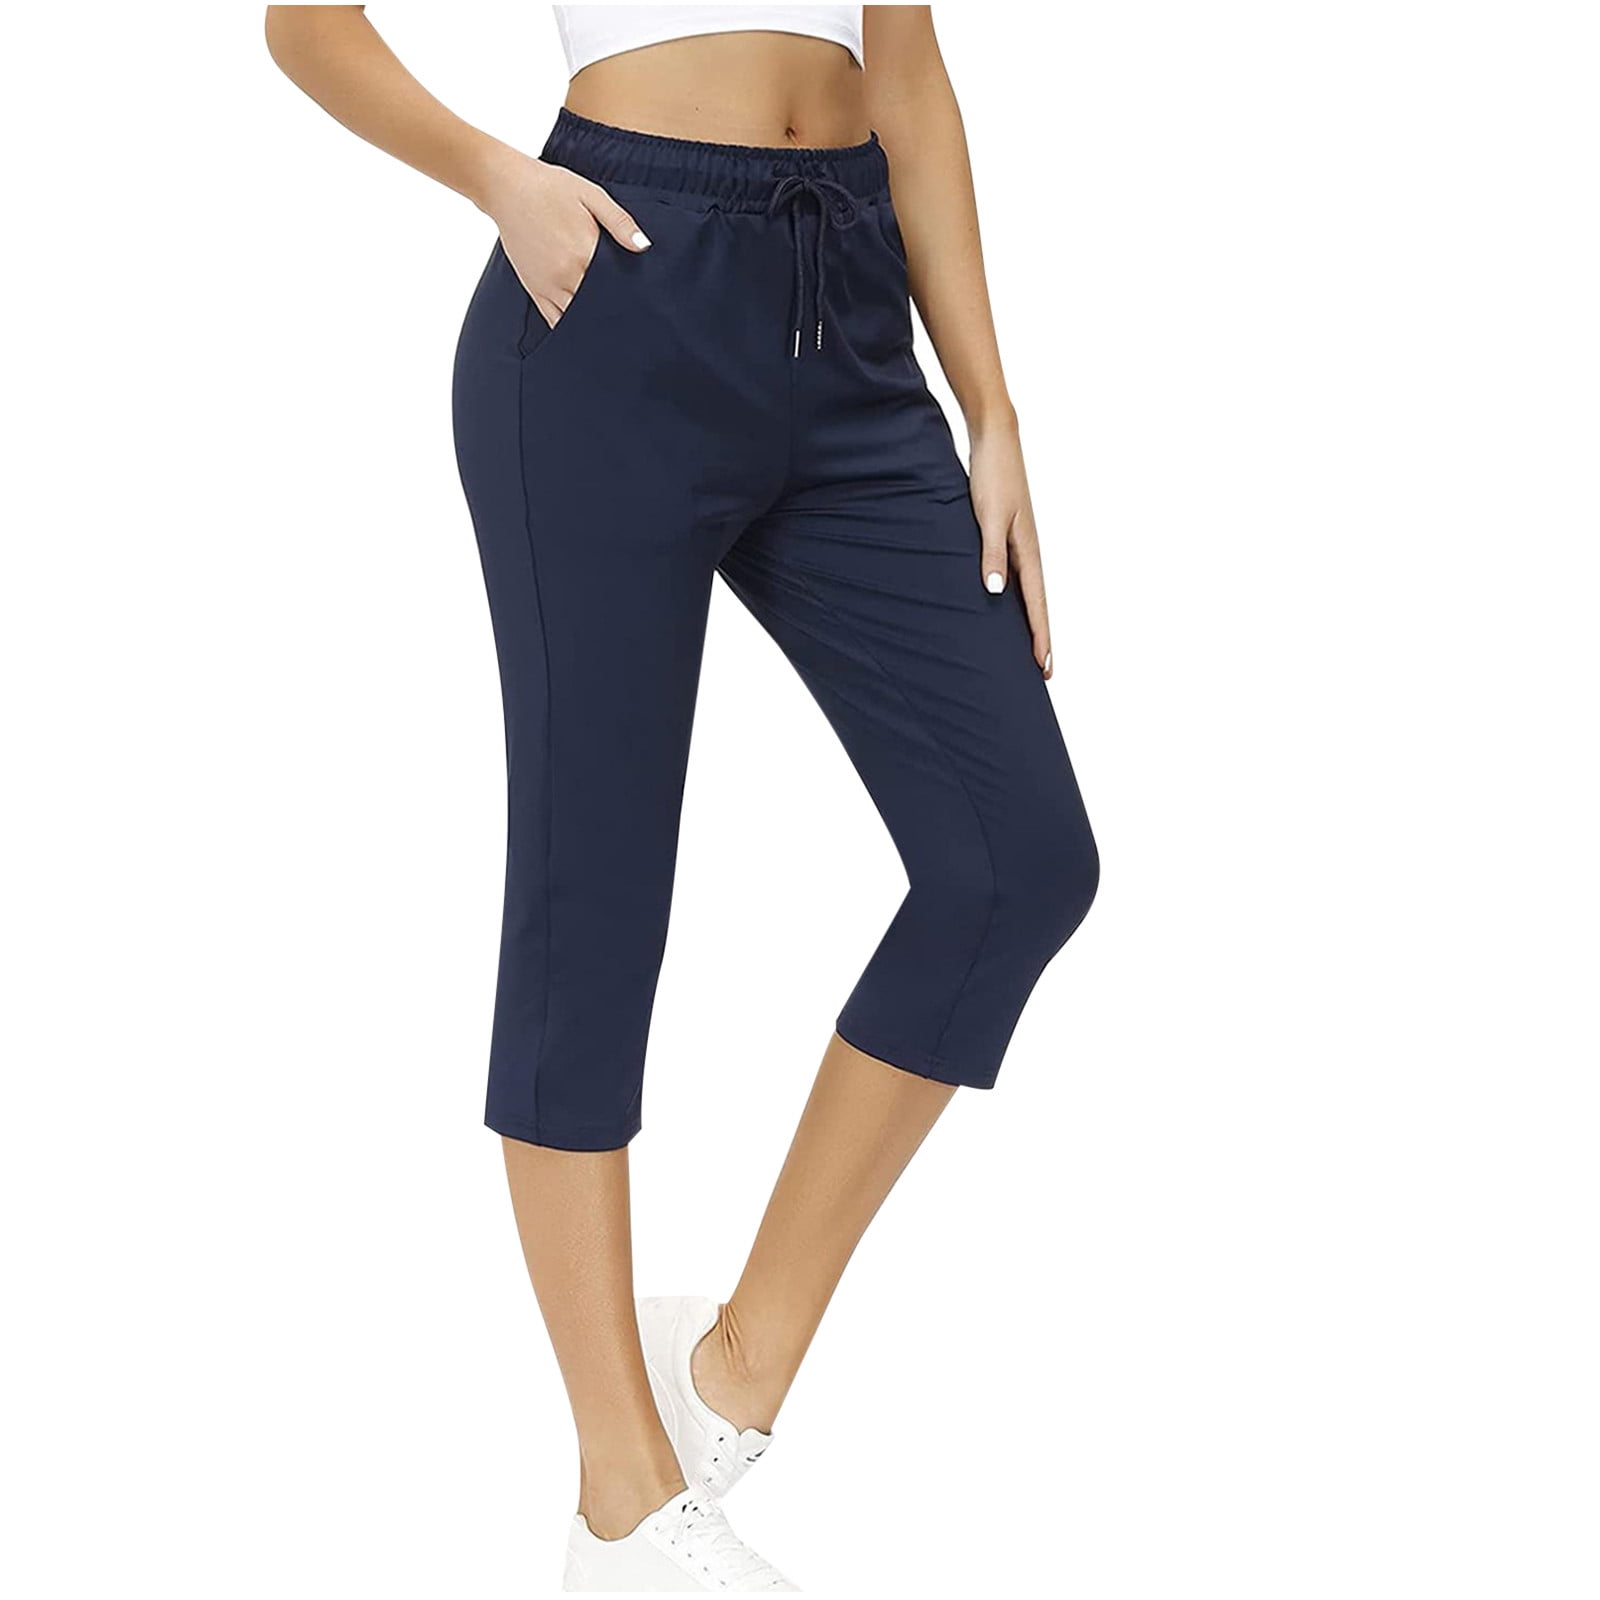 Wyongtao Women's Sweatpants Capri Pants Cropped Jogger Running Pants Lounge  Loose Fit Drawstring Waist with Pockets,Navy XL